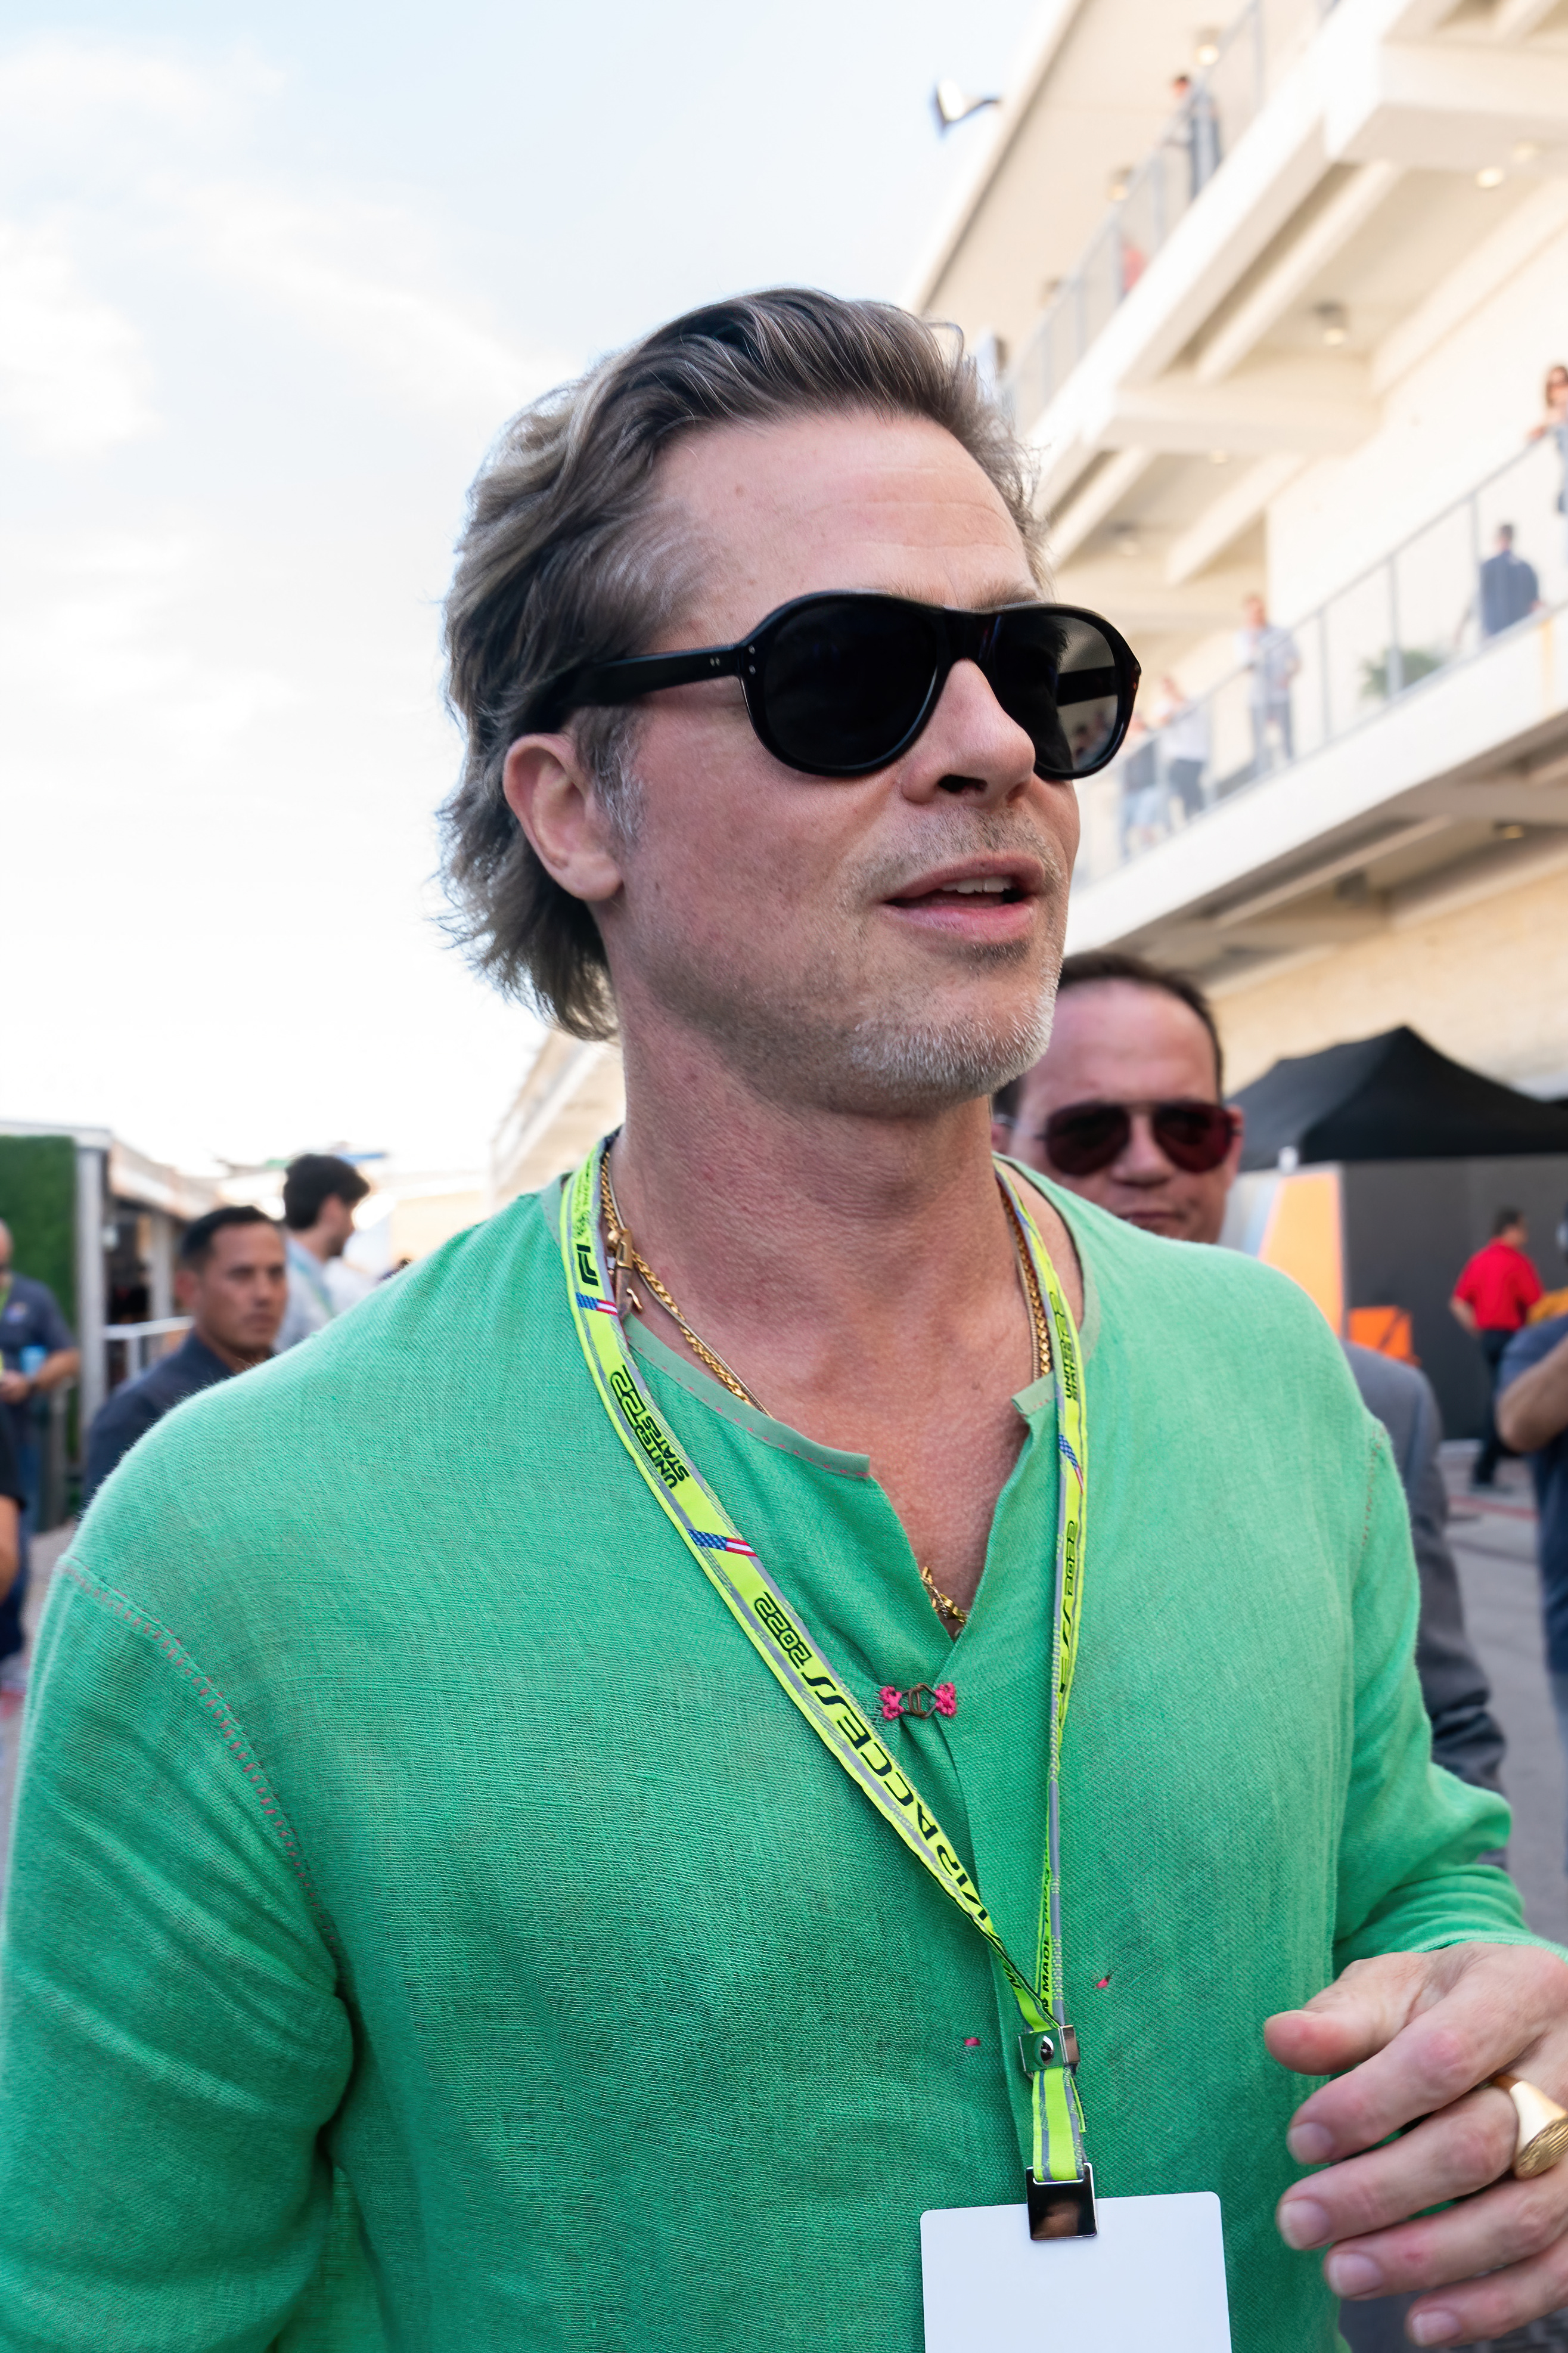 US actor Brad Pitt tours the paddock before the Formula One United States Grand Prix 3rd practice session at the Circuit of the Americas in Austin, Texas, on October 22, 2022. SUZANNE CORDEIRO / AFP